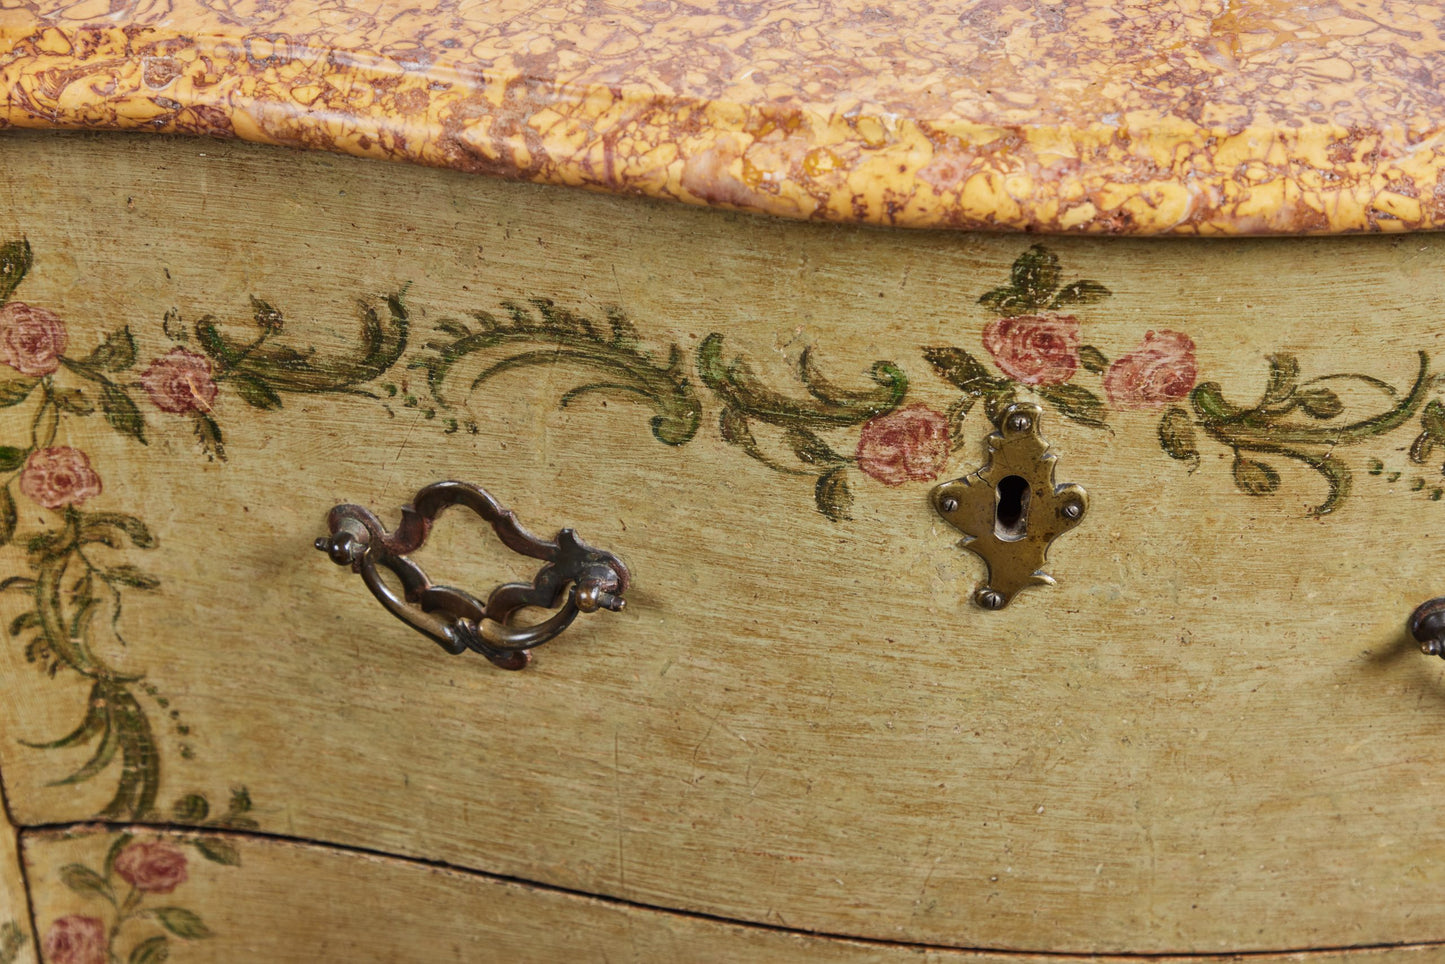 Painted Marble Top Commode